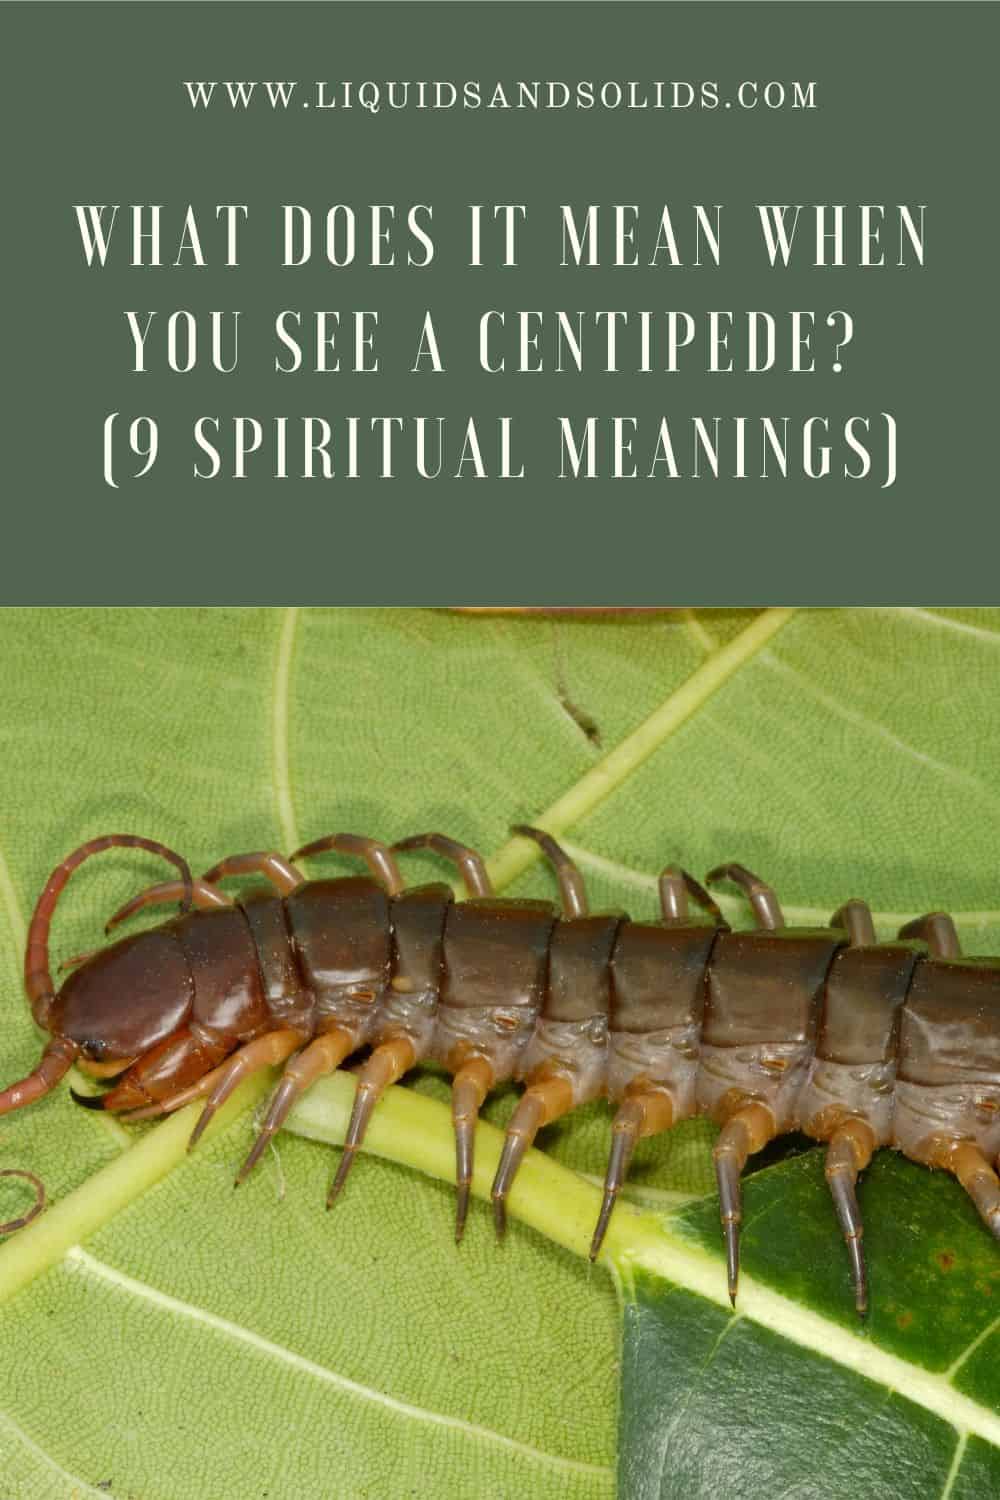 What Does It Mean When You See A Centipede? (9 Spiritual Meanings)